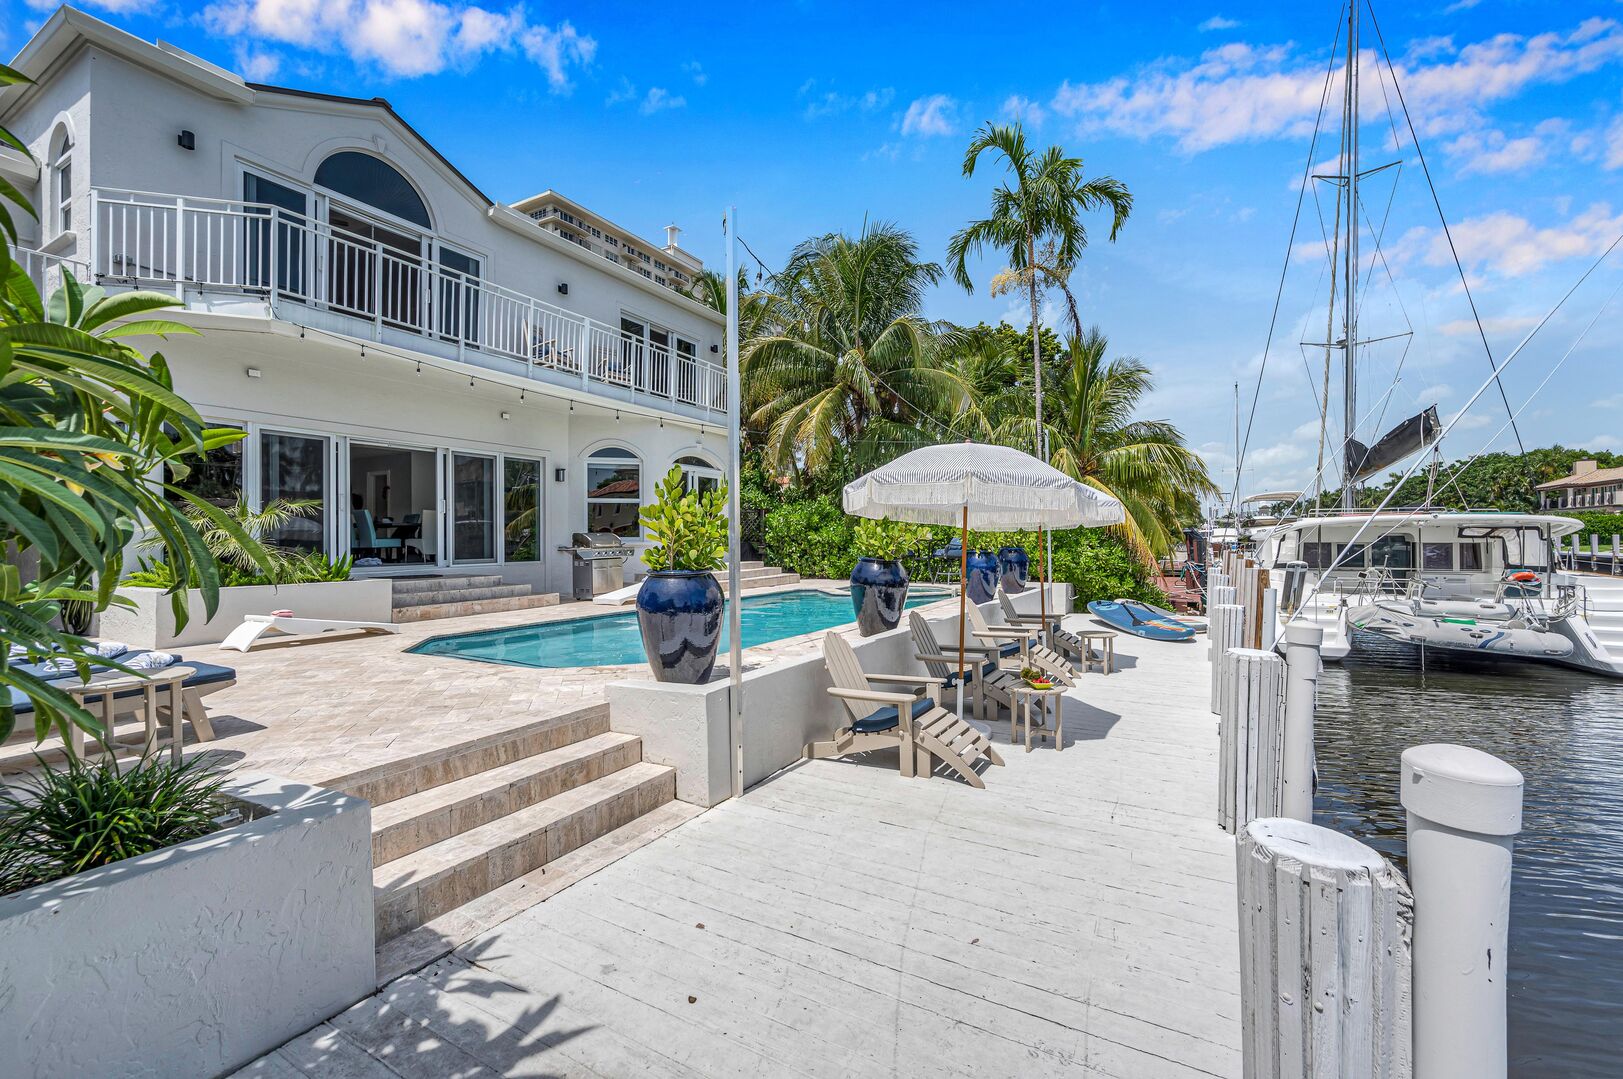 Enjoy the waterfront tranquility from the lounge areas and heated pool